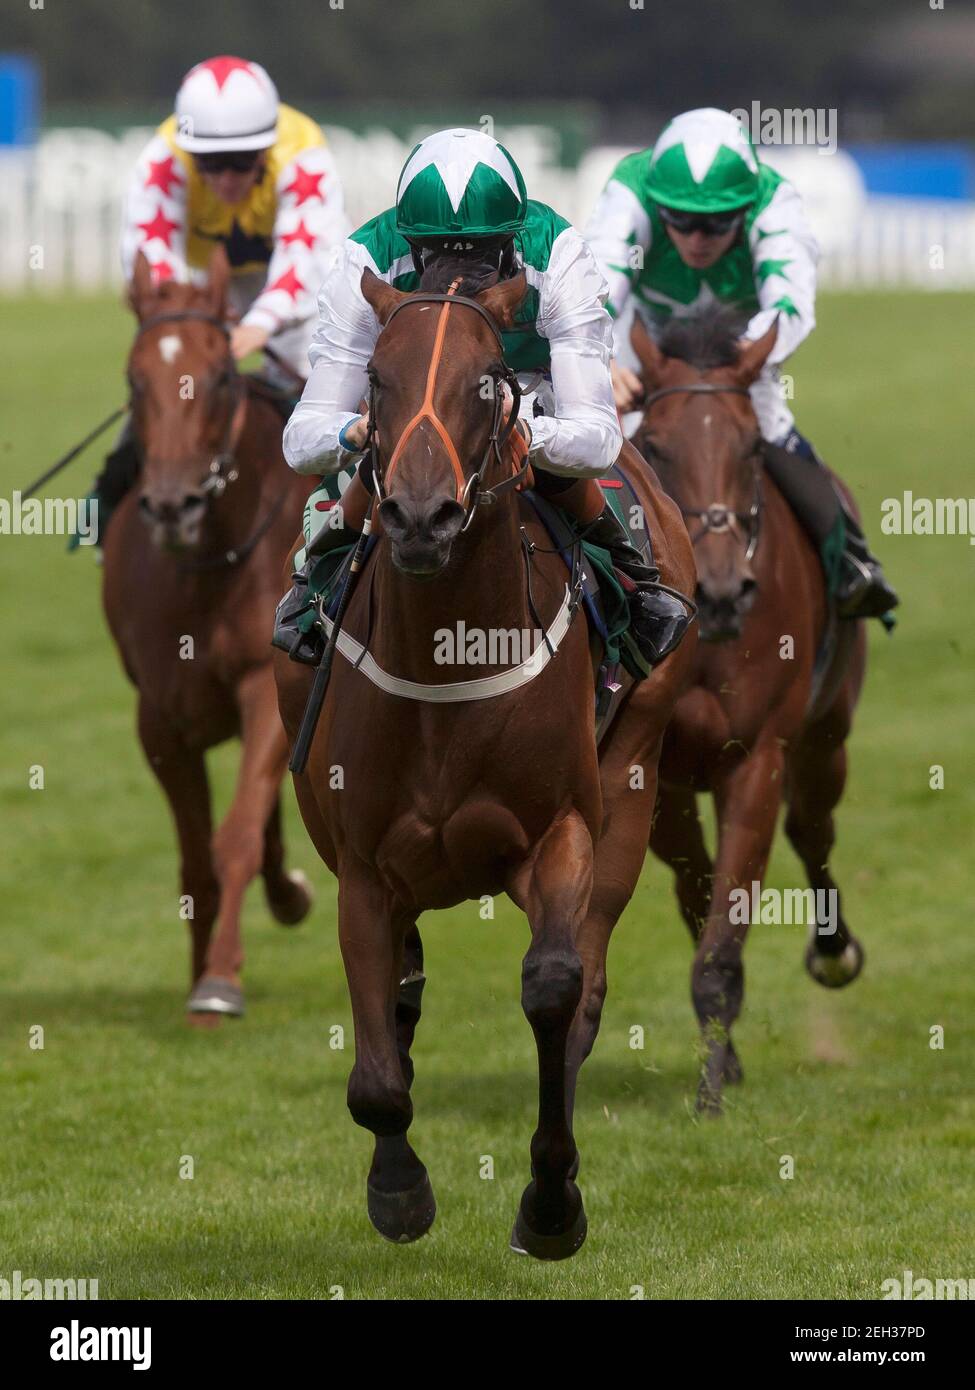 Horse Racing - Ascot - Ascot Racecourse - 28/7/12   Maureen ridden by Richard Hughes leads the field home to win the 15.25, The Princess Margaret Juddmonte Stakes Race  Mandatory Credit: Action Images / Julian Herbert  Livepic Stock Photo